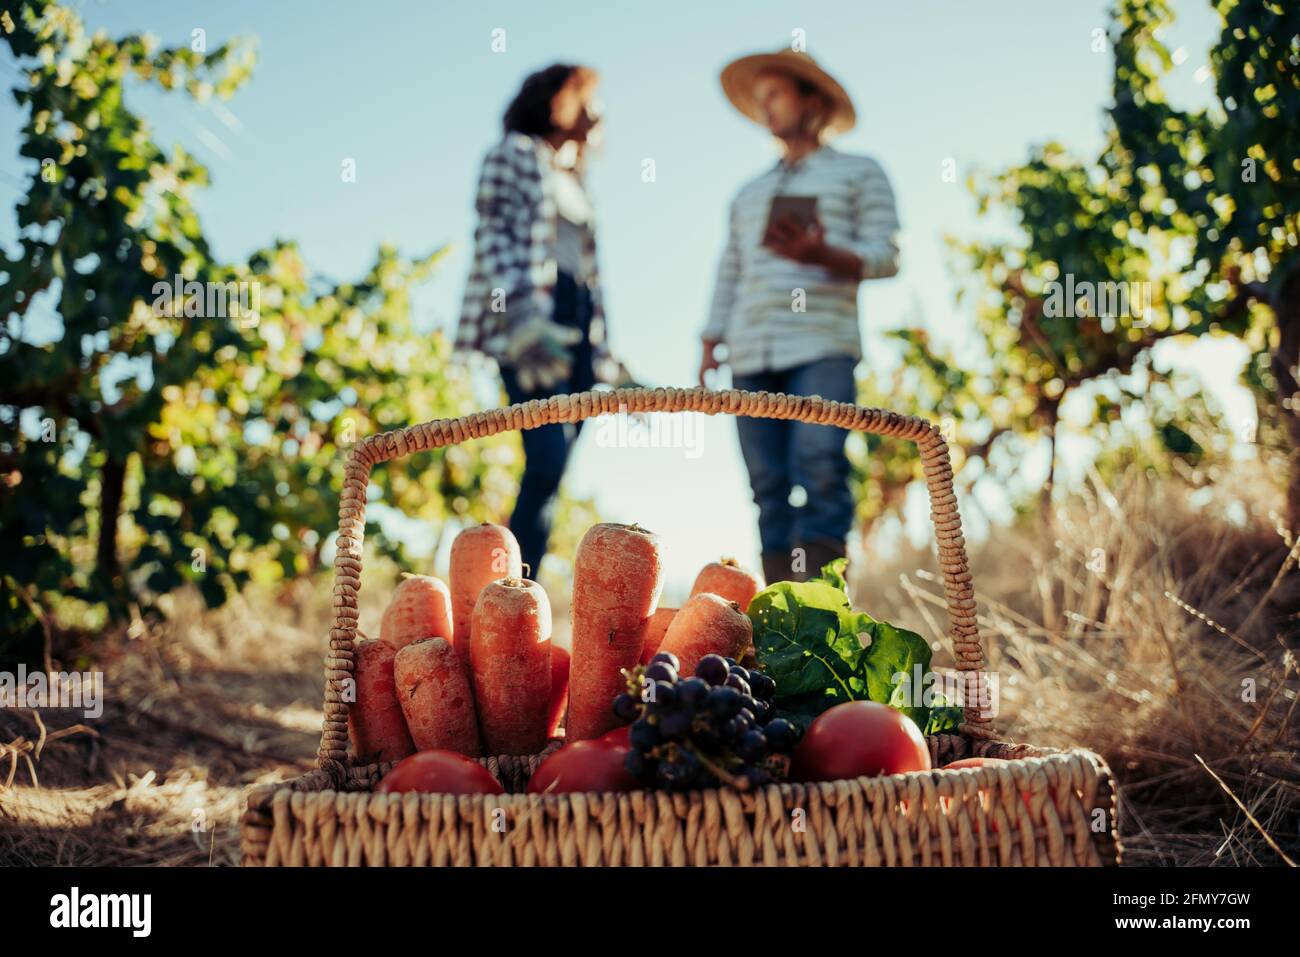 Two farmers working on harvest researching techniques on digital tablet while standing in vineyards Stock Photo